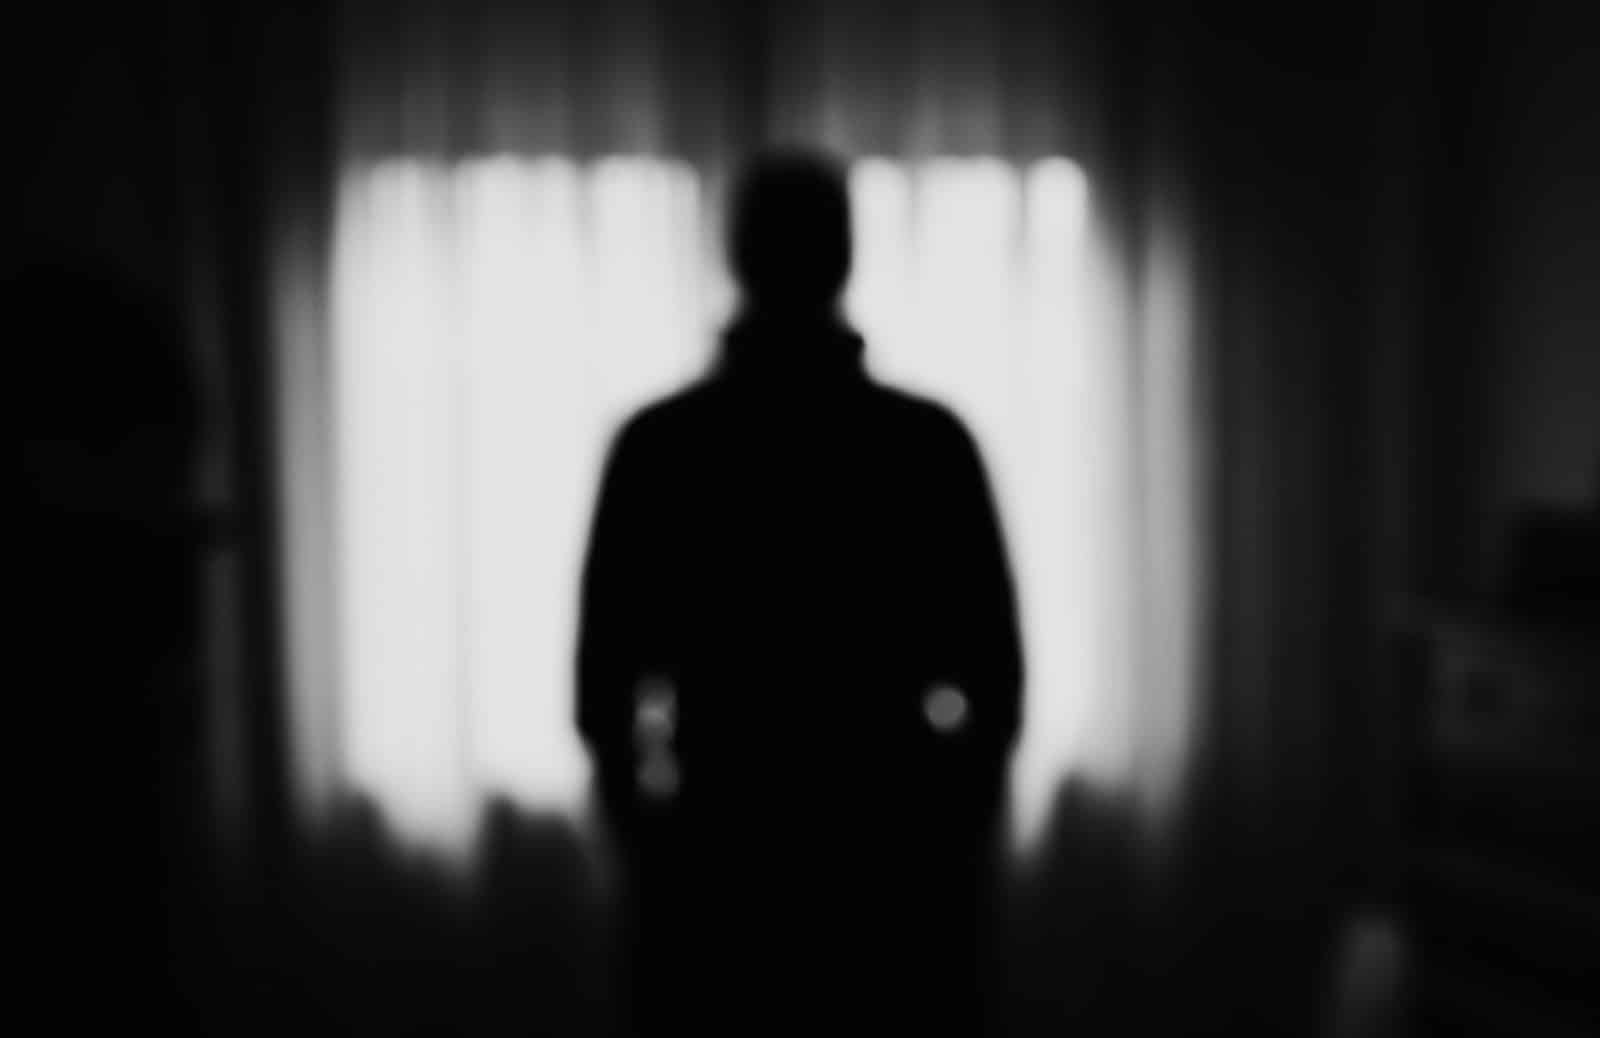 Shadowy black and white figure standing in a room | New Direction Family Law